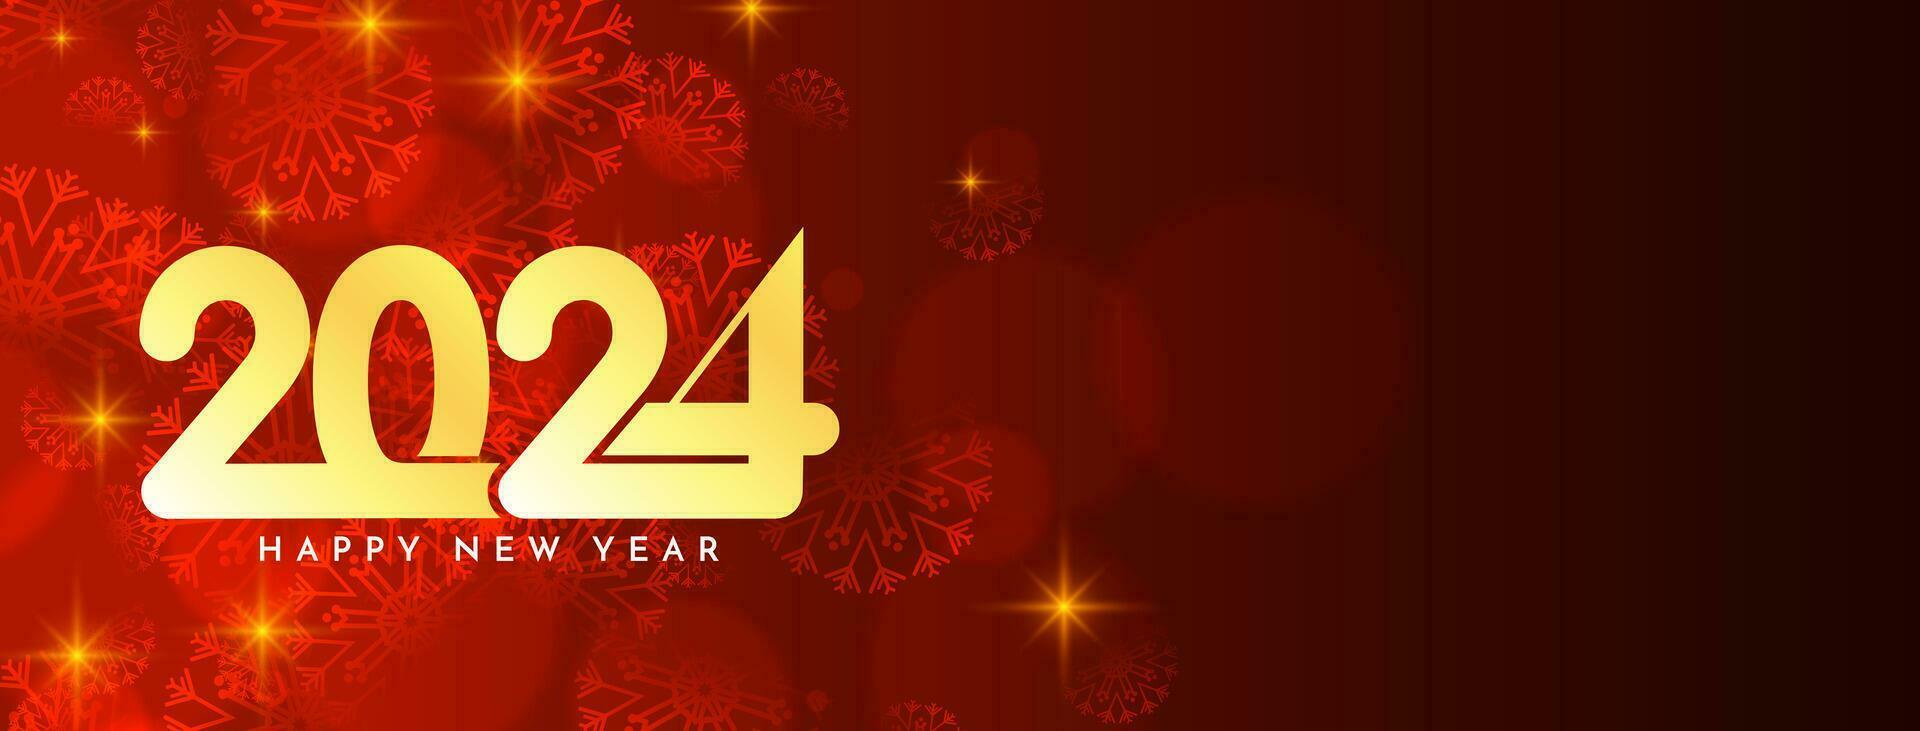 Happy new year 2024 beautiful glossy banner design vector